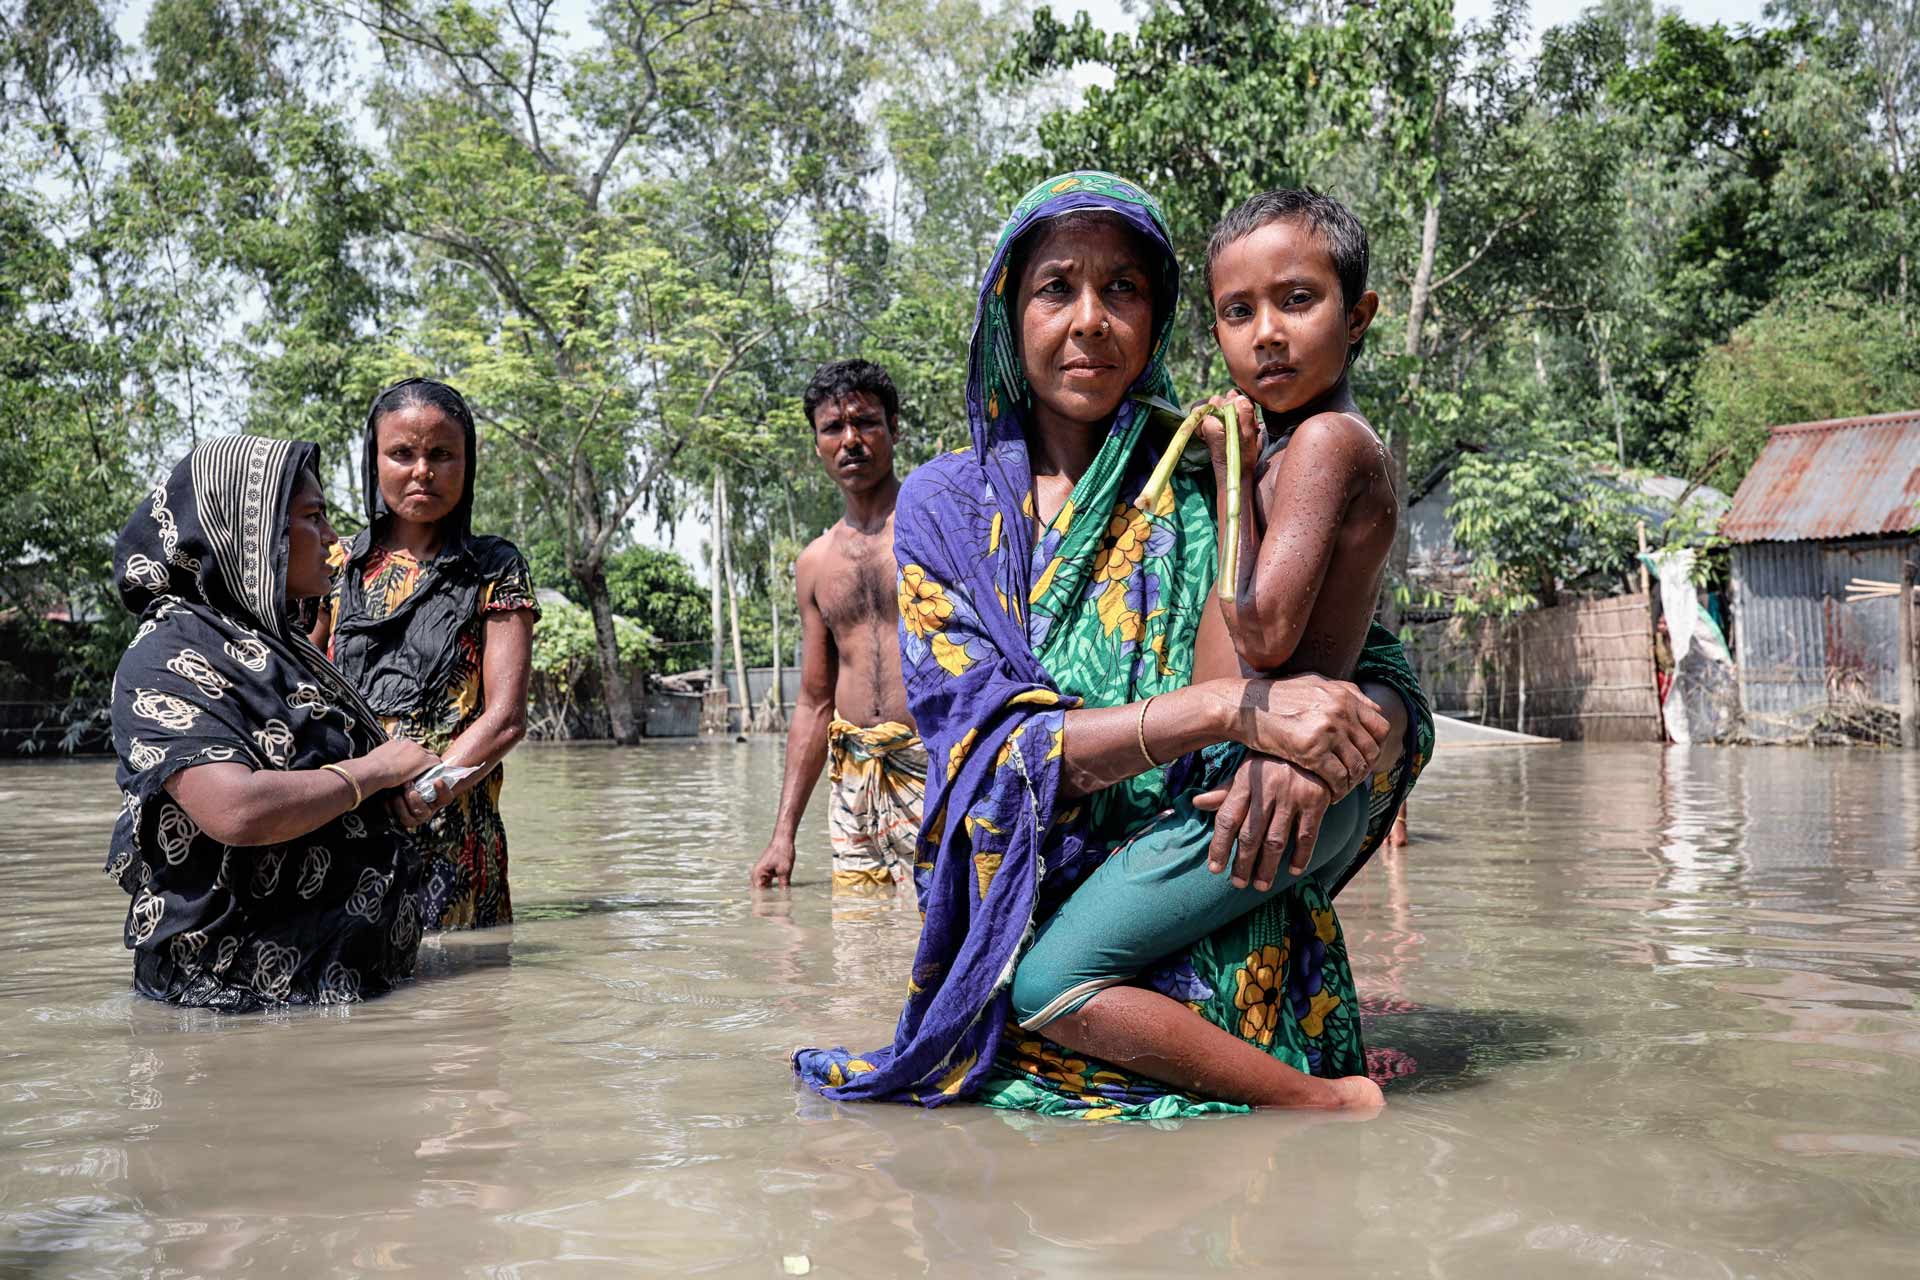 A group of people standing in flood waters. A woman is holding a child.